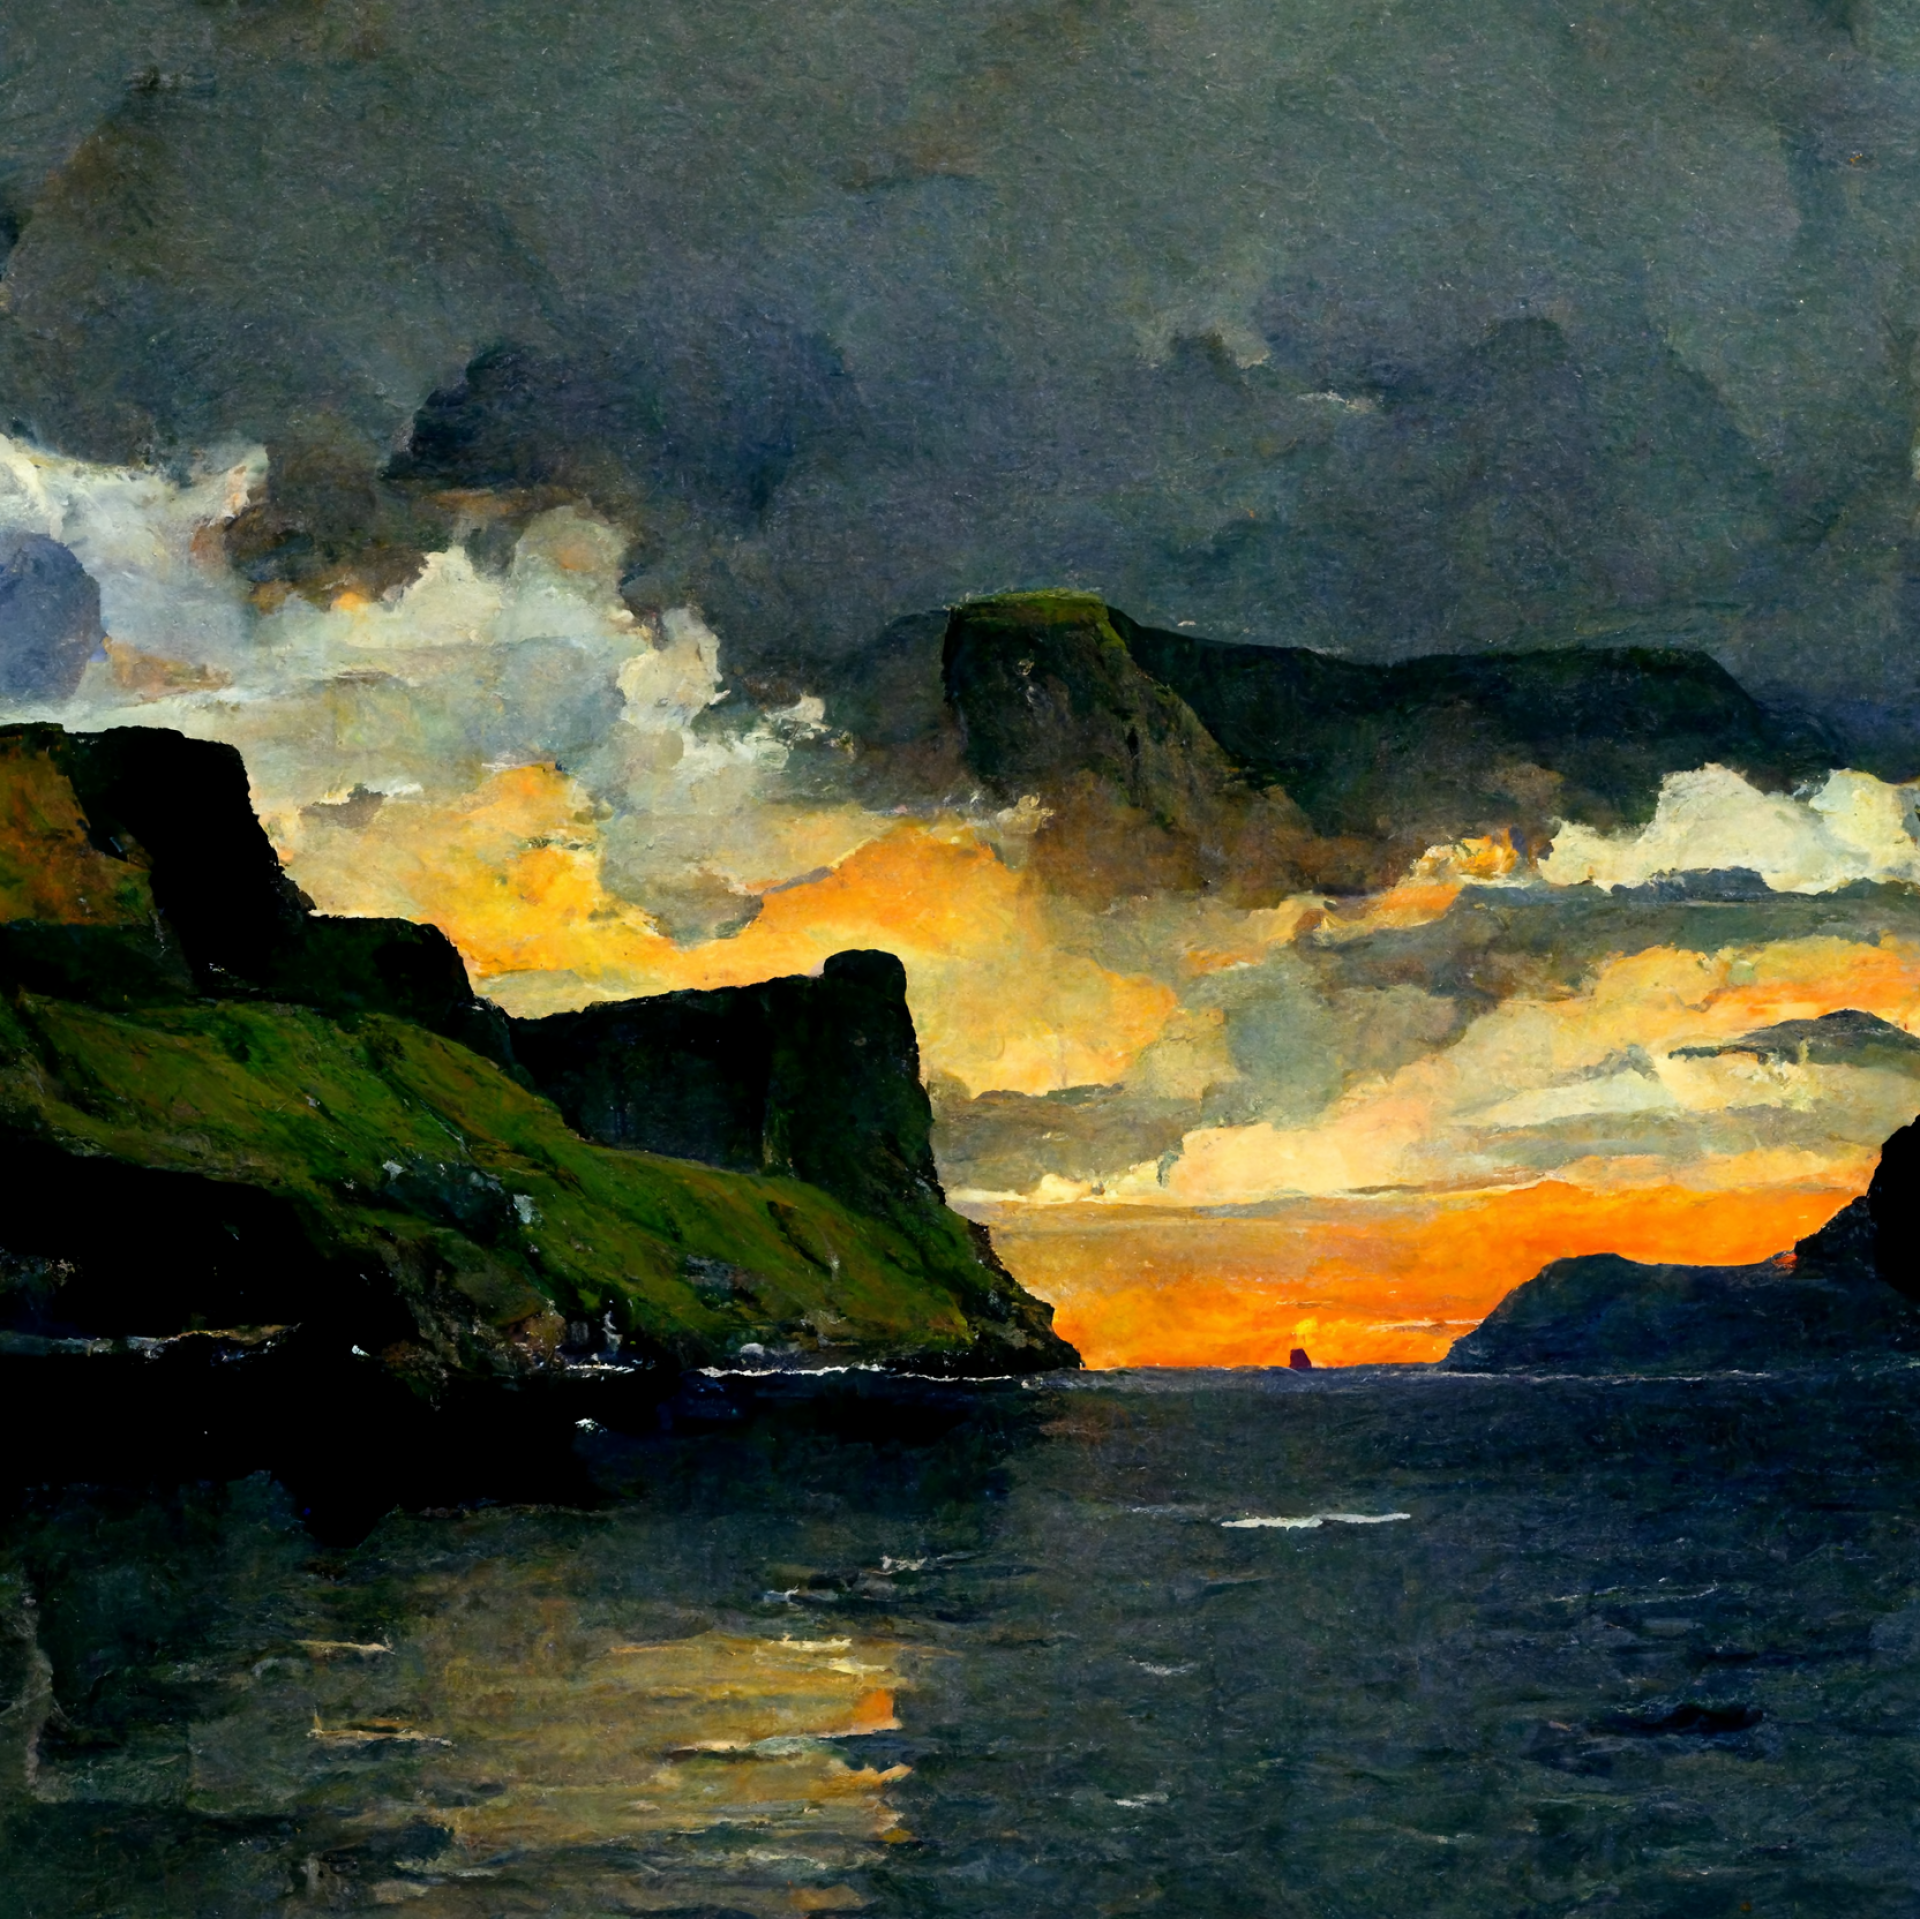 AI-generated image from Midjourney, the Faroe Islands inspired by Cèzanne